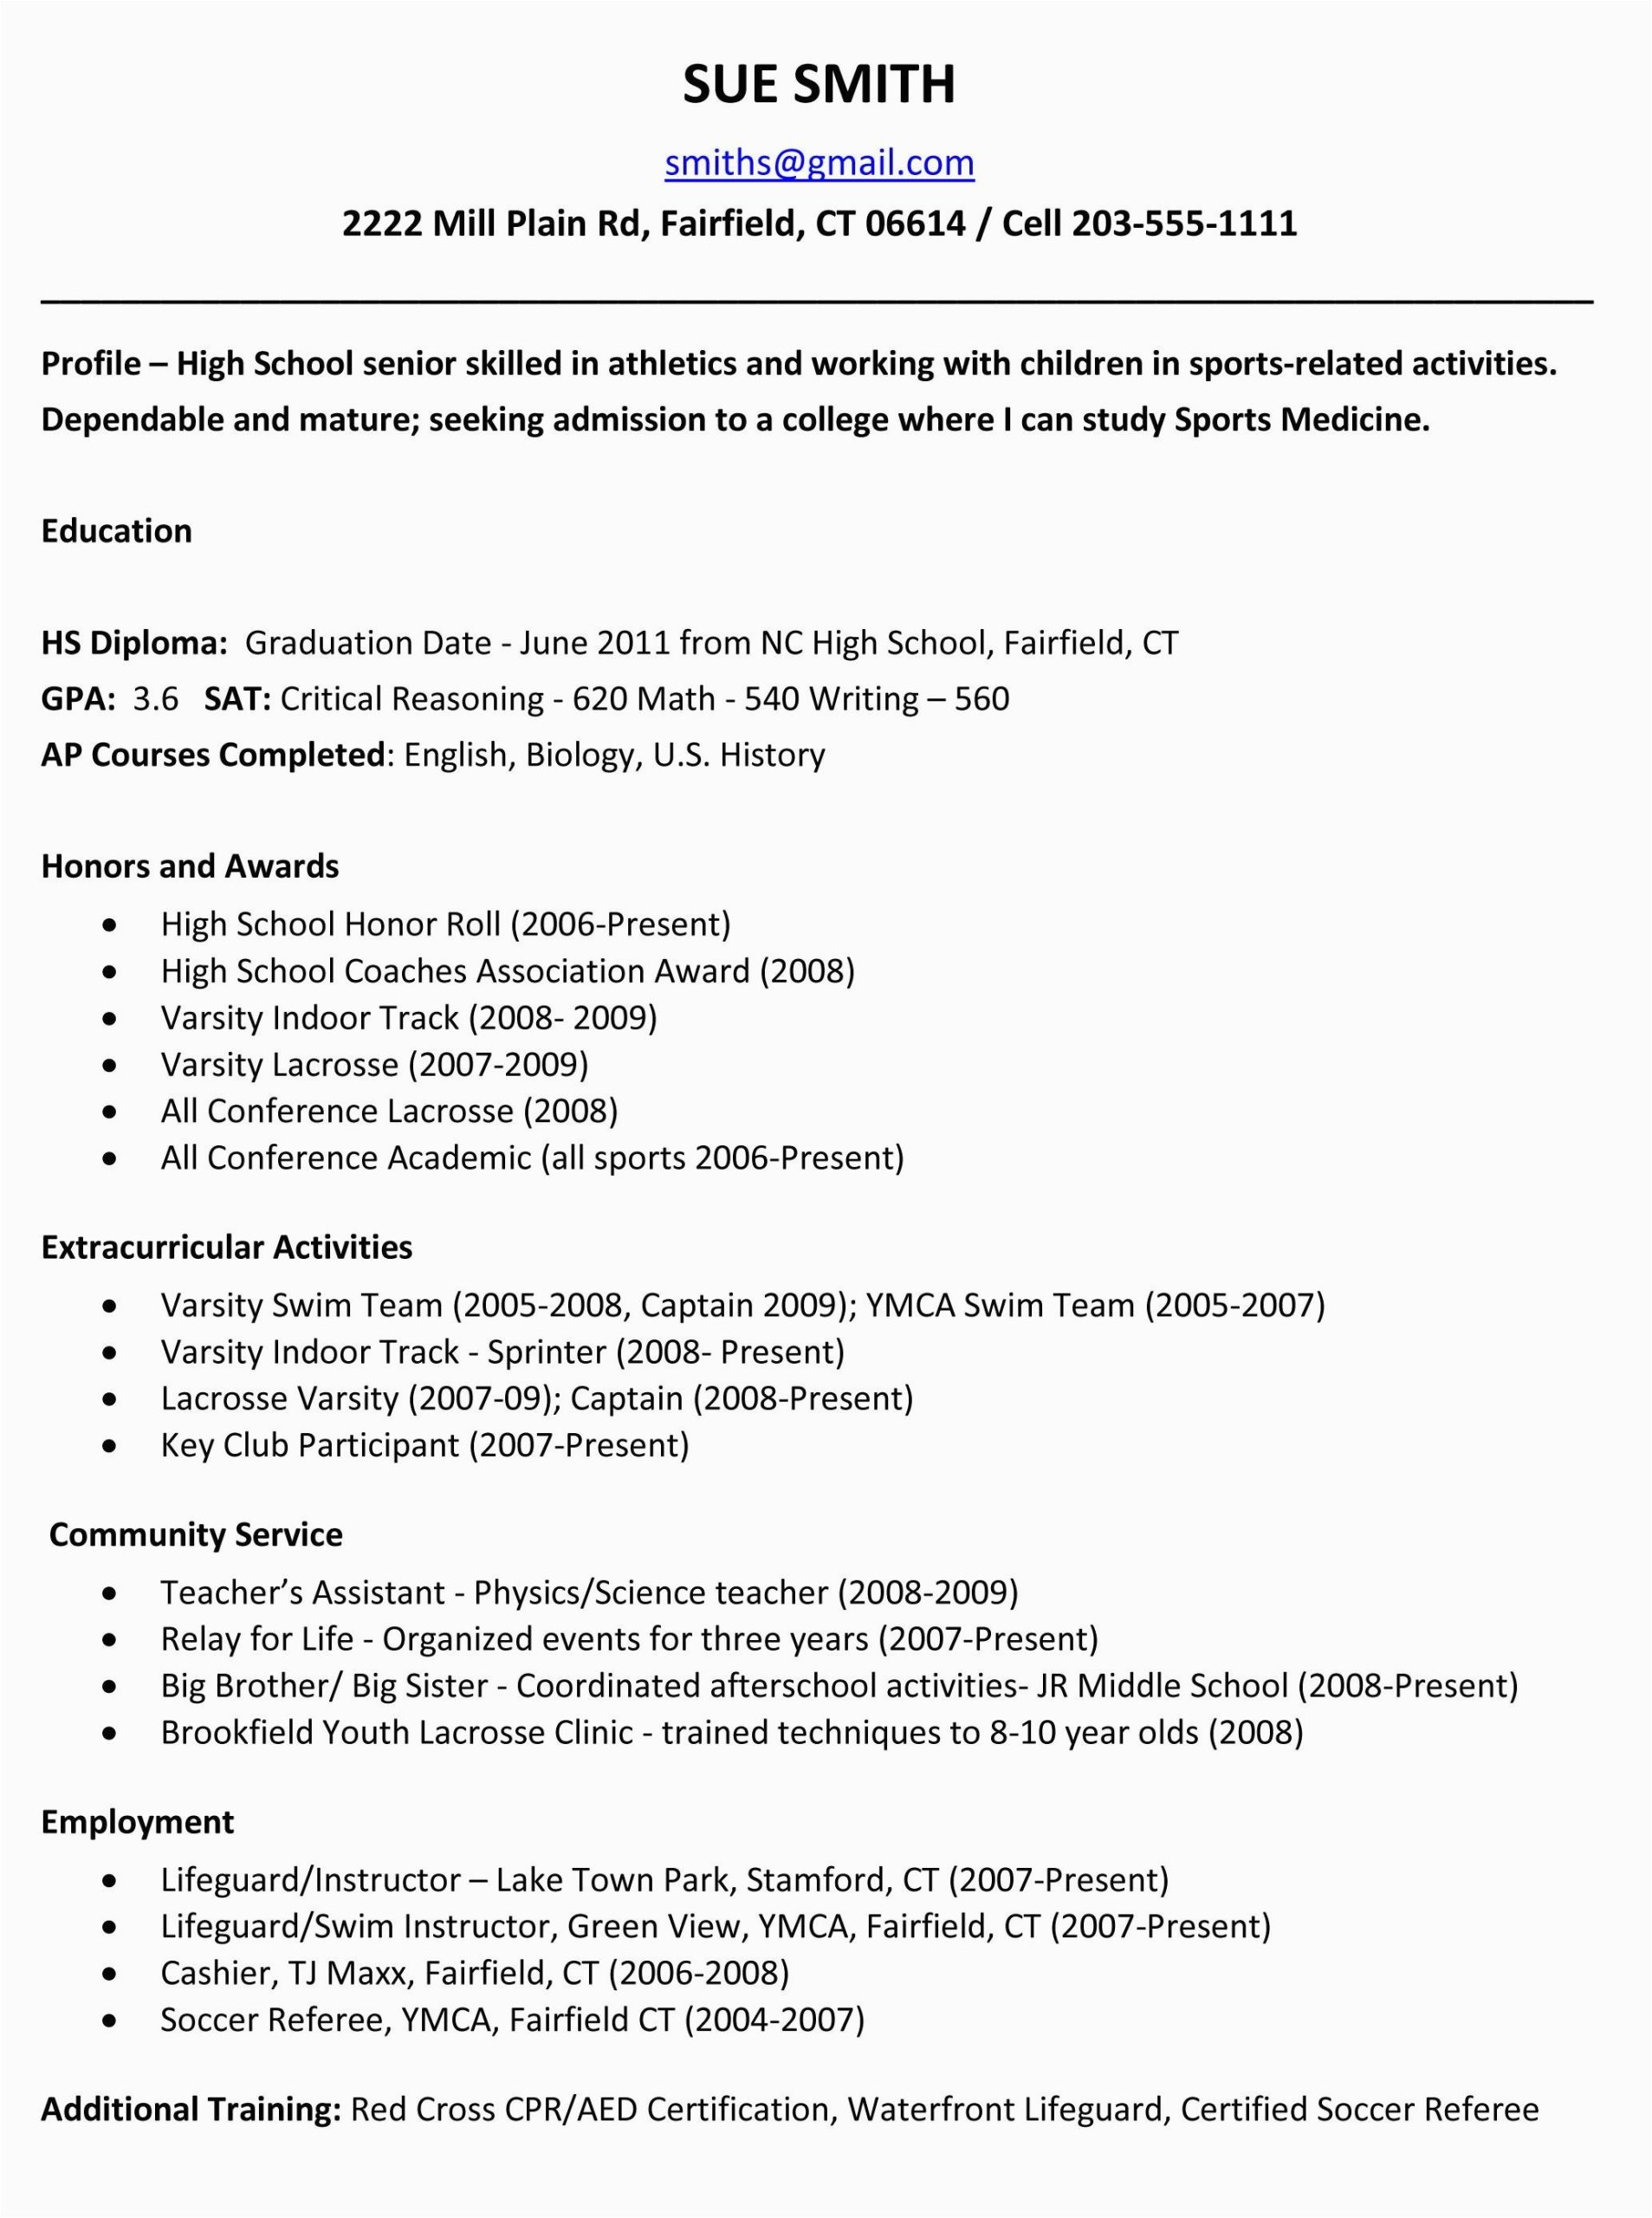 Samples Of High School Resumes for College Sample Resumes